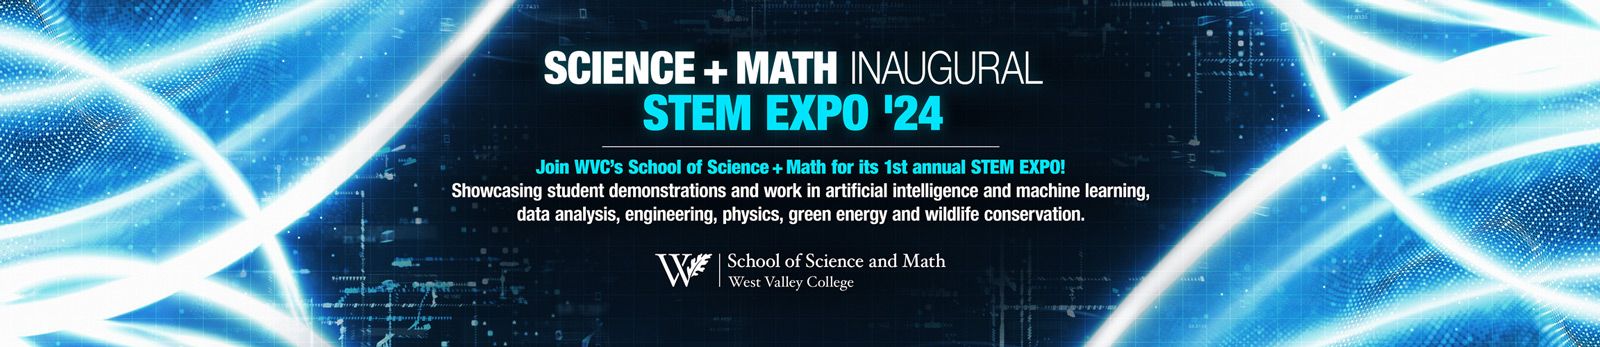 Science and math inaugural STEM expo 2024